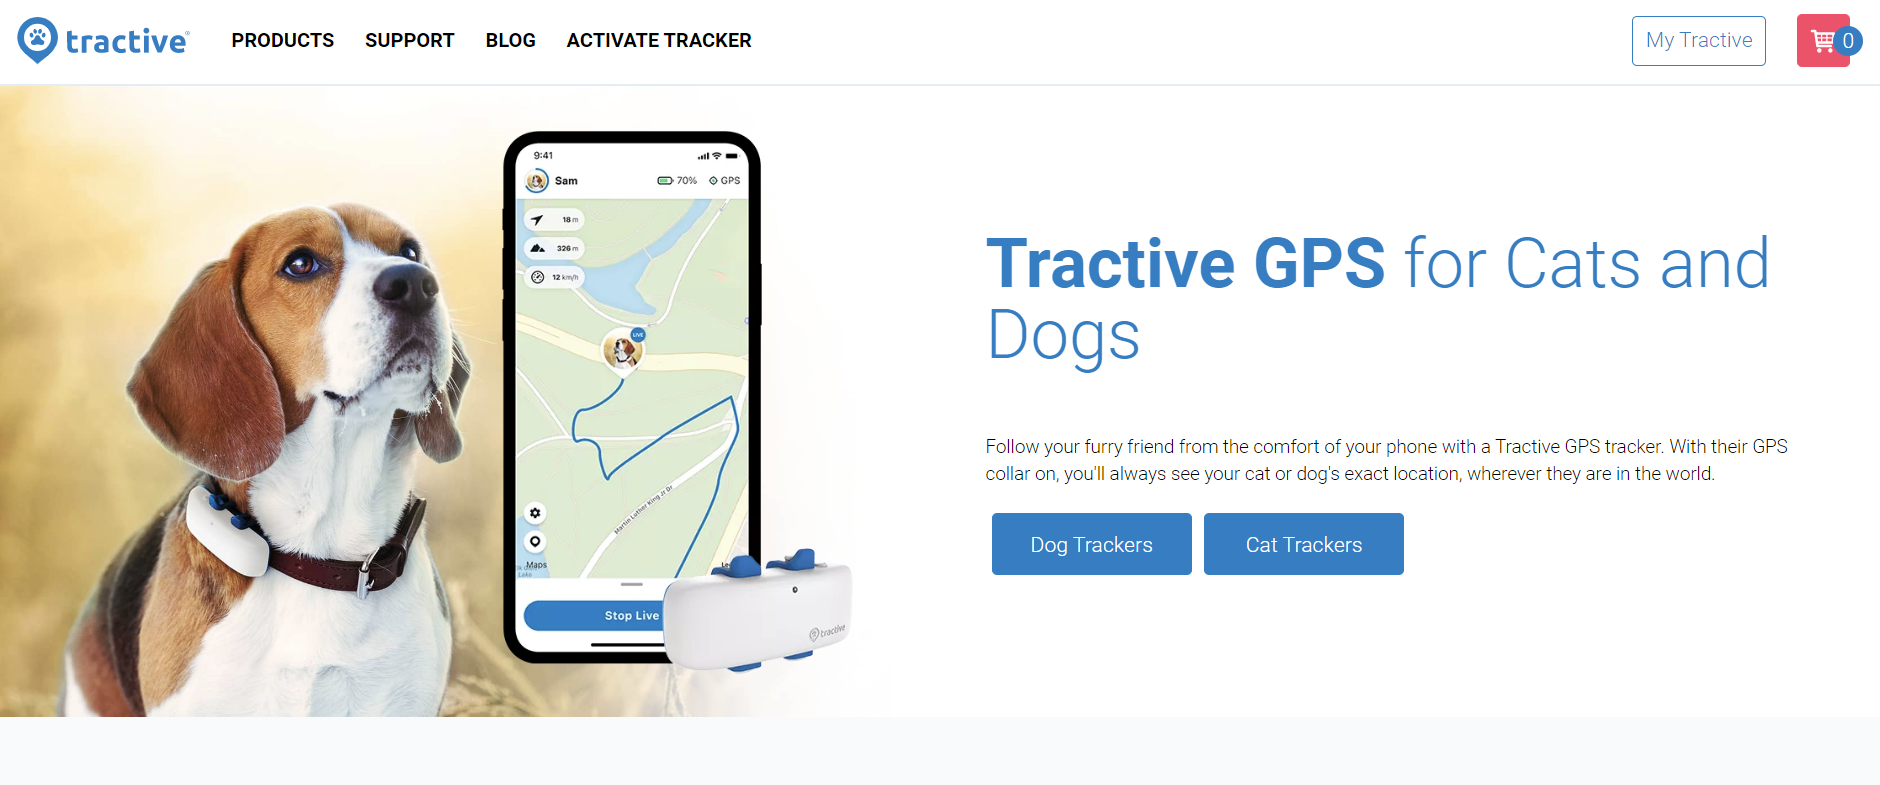 Tractive is an Austria-based company that develops GPS-tracking devices designed for dogs and cats.